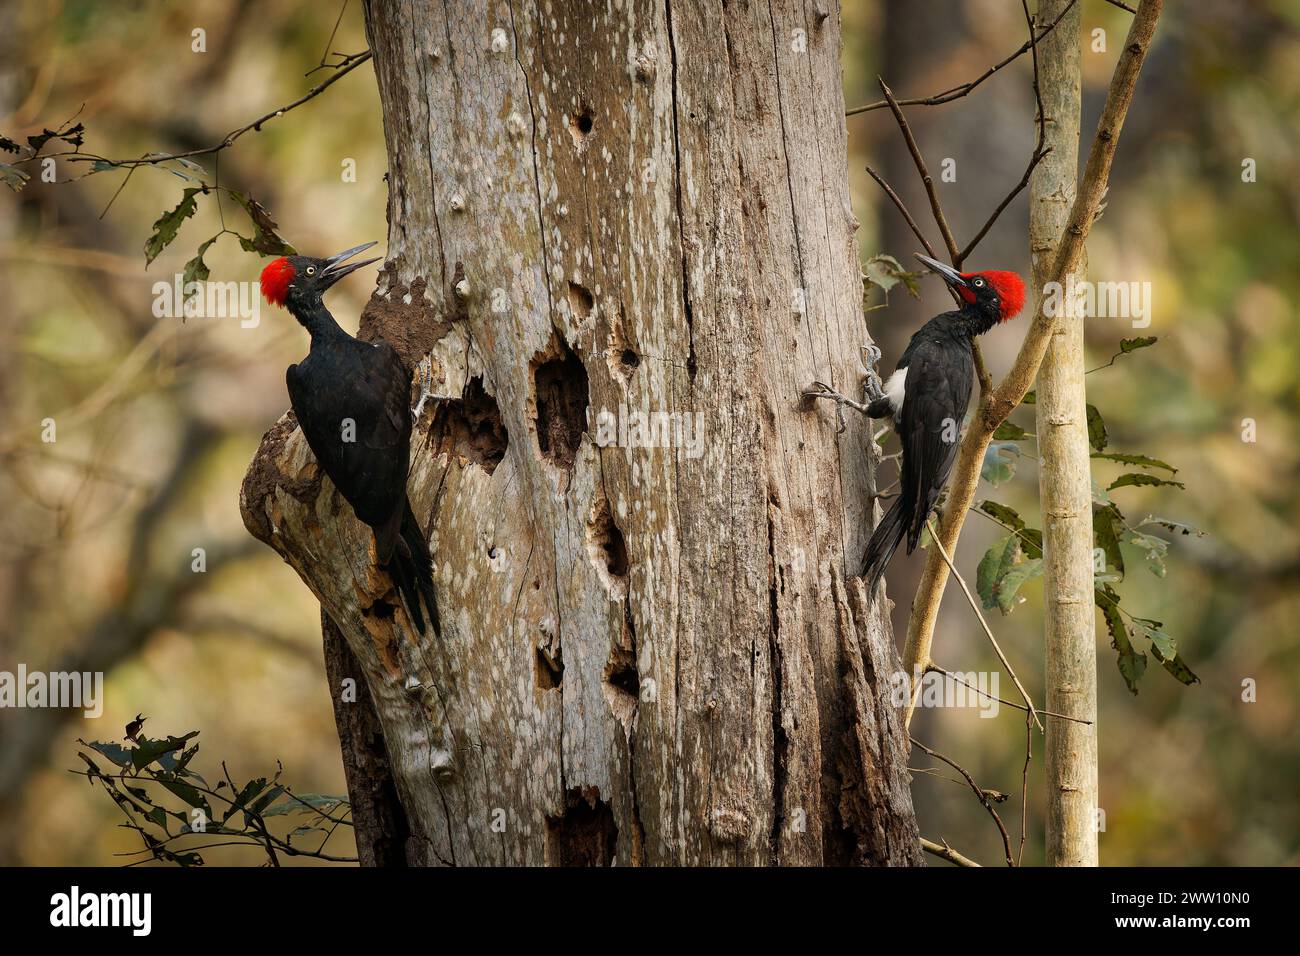 White-bellied woodpecker or Great black woodpecker - Dryocopus javensis is bird from evergreen forests in tropical Asia. Pair of male and female feed Stock Photo